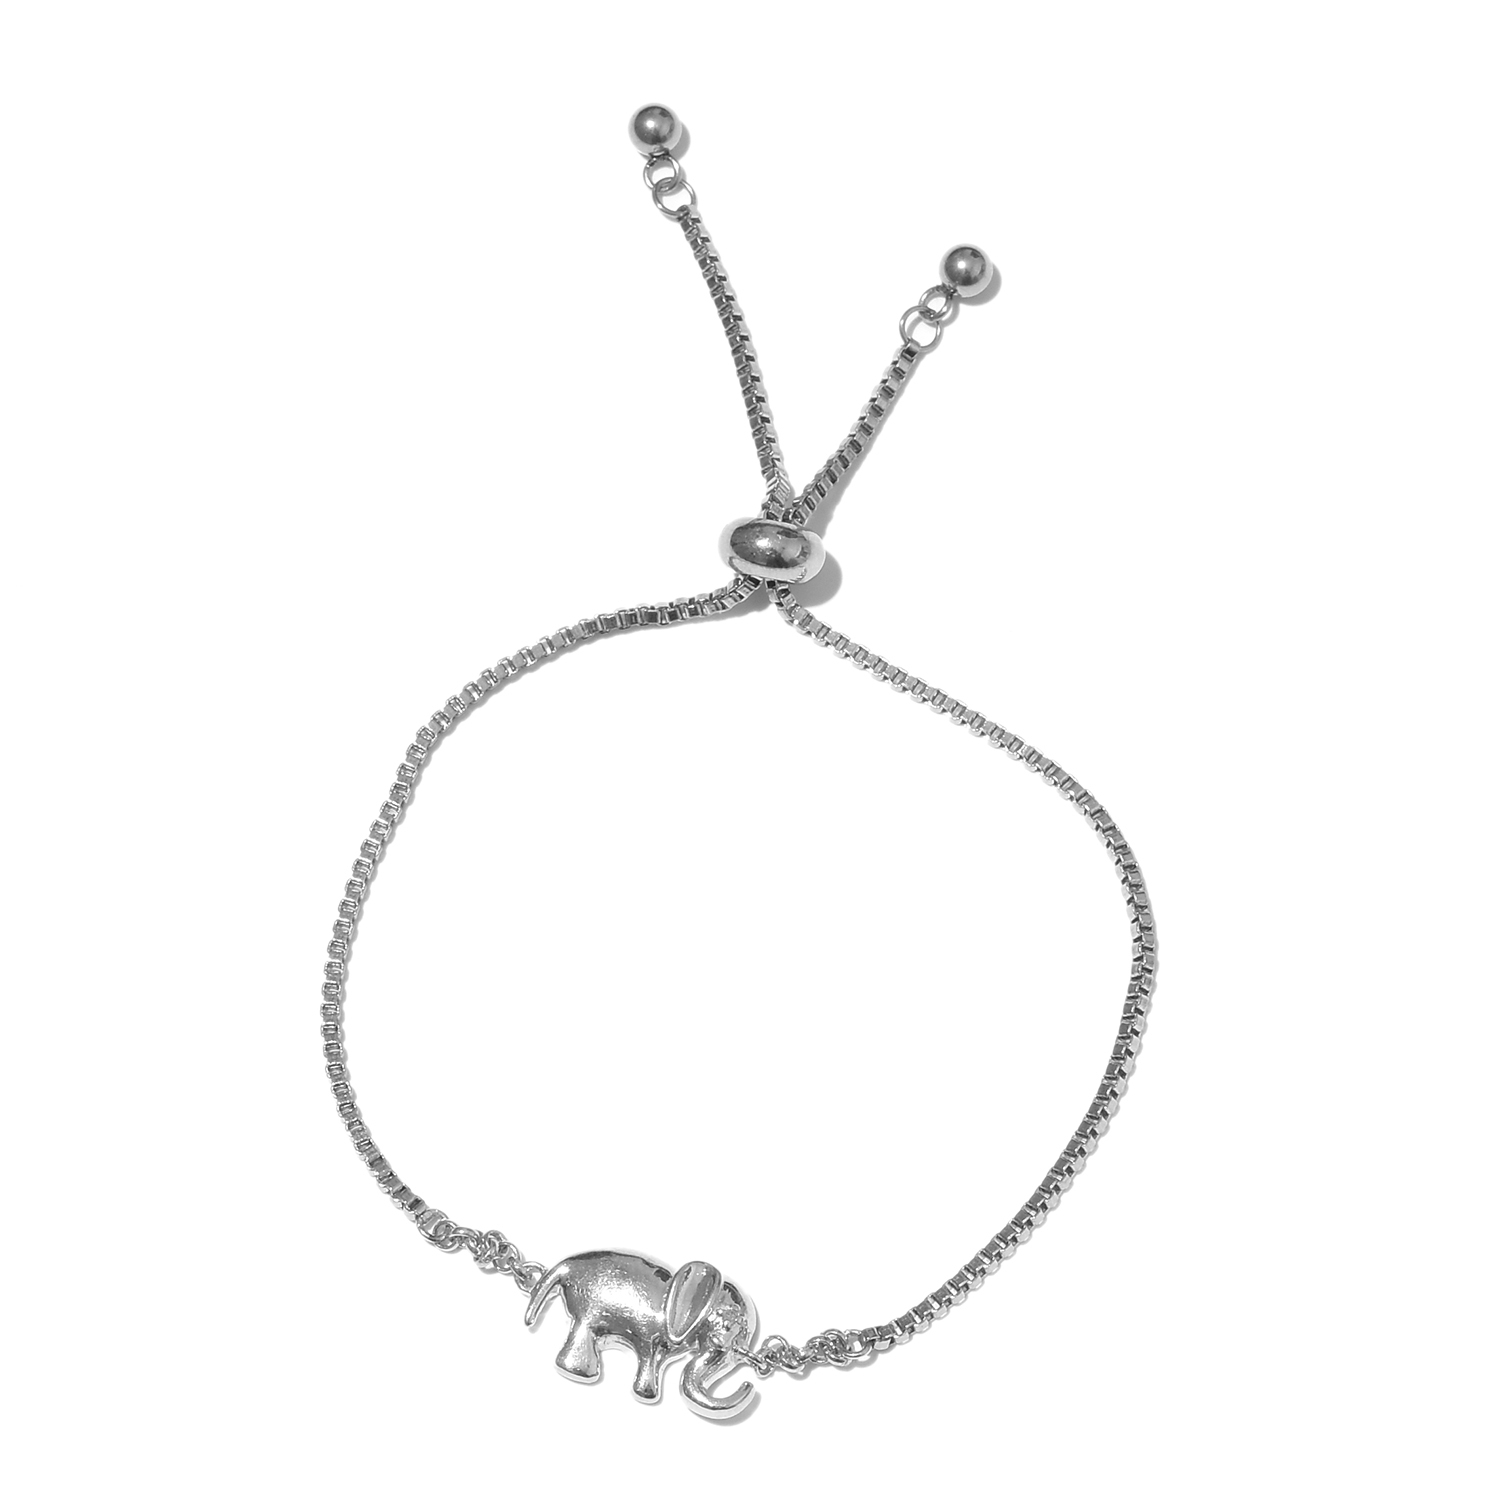 Diamond Accent Elephant Charm Bolo Bracelet in Sterling Silver - Houzz of DVA Boutique